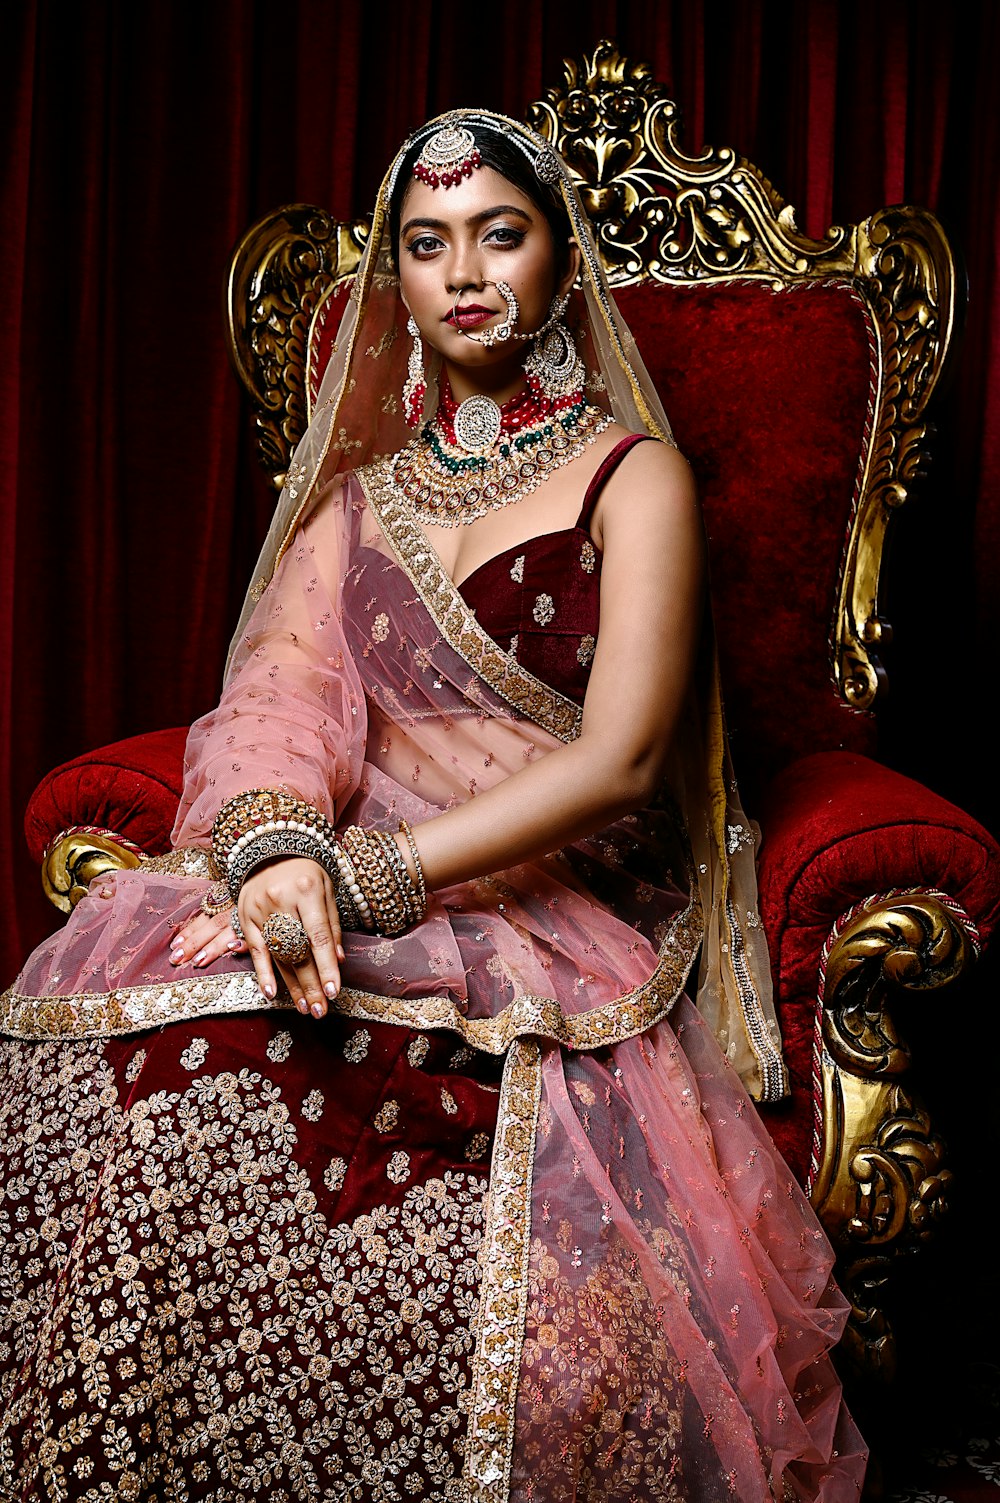 a woman in a red and gold bridal sitting on a red chair